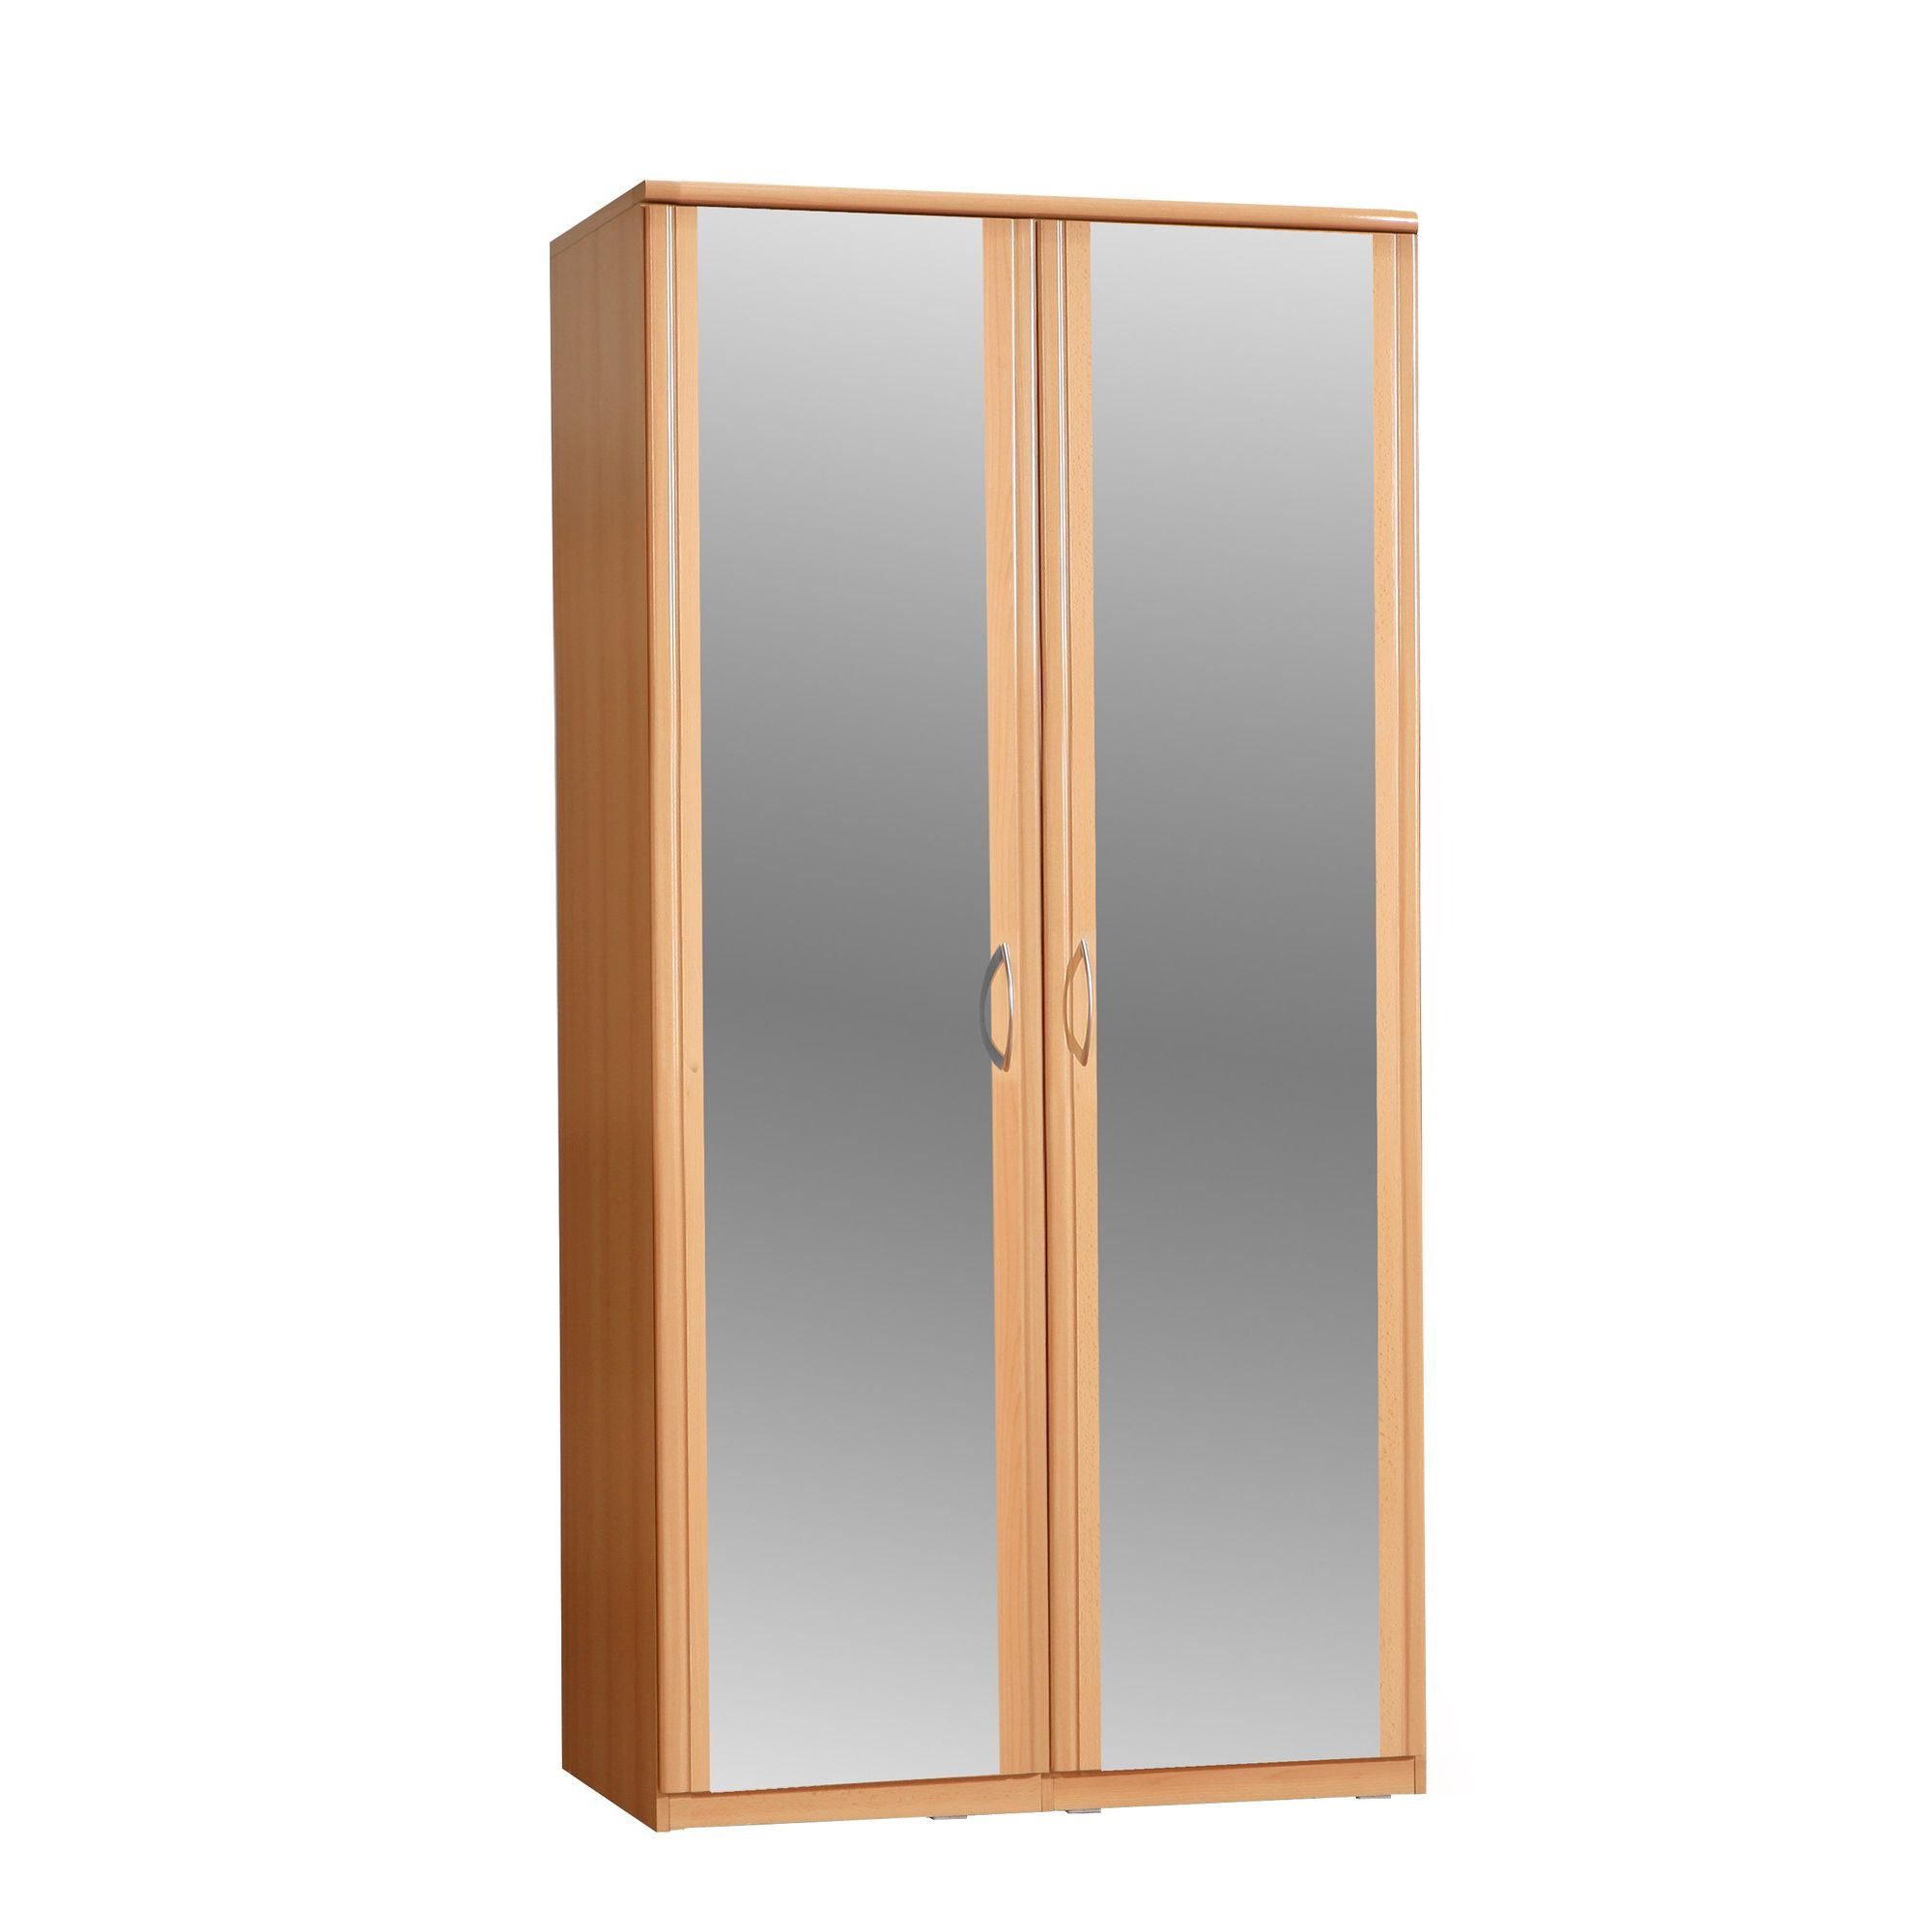 Ideal Furniture Ruby Two Door Wardrobe in Beech at Tesco Direct